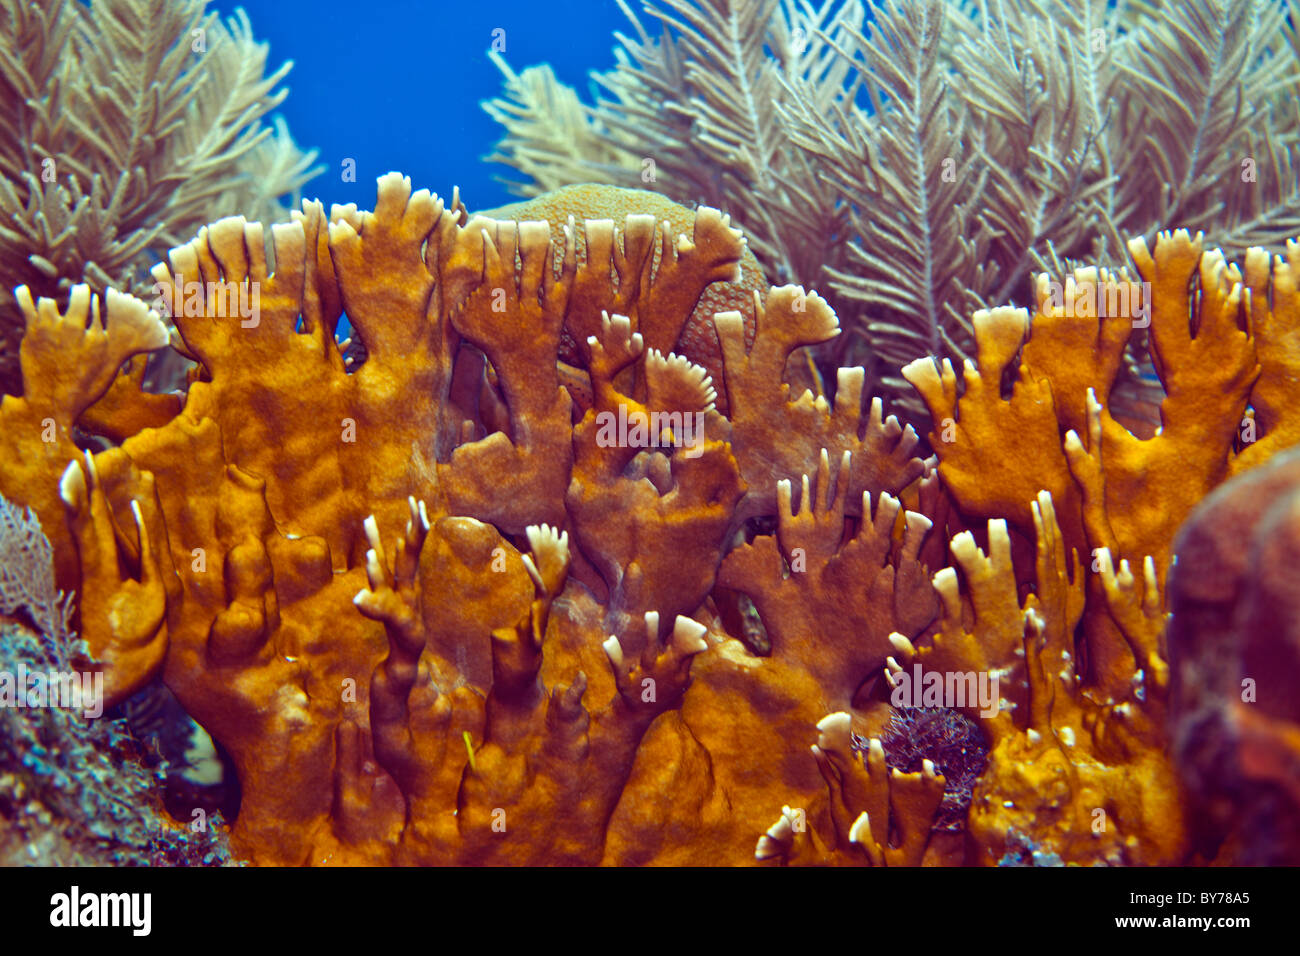 Close up image of Blade fire coral Stock Photo